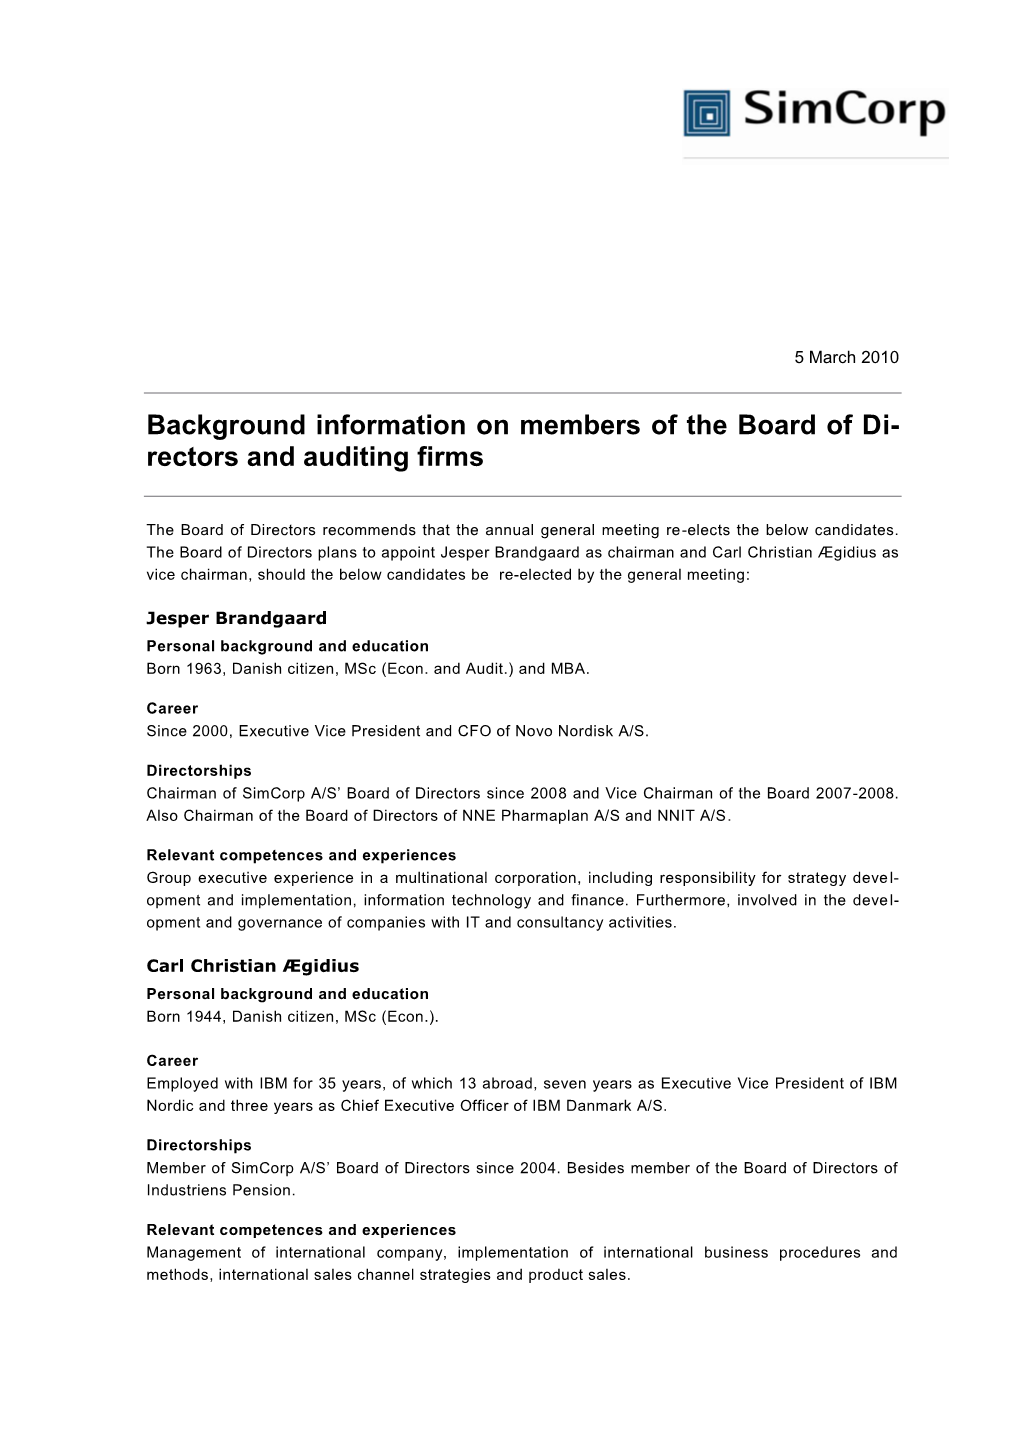 Background Information on Members of the Board of Di- Rectors and Auditing Firms